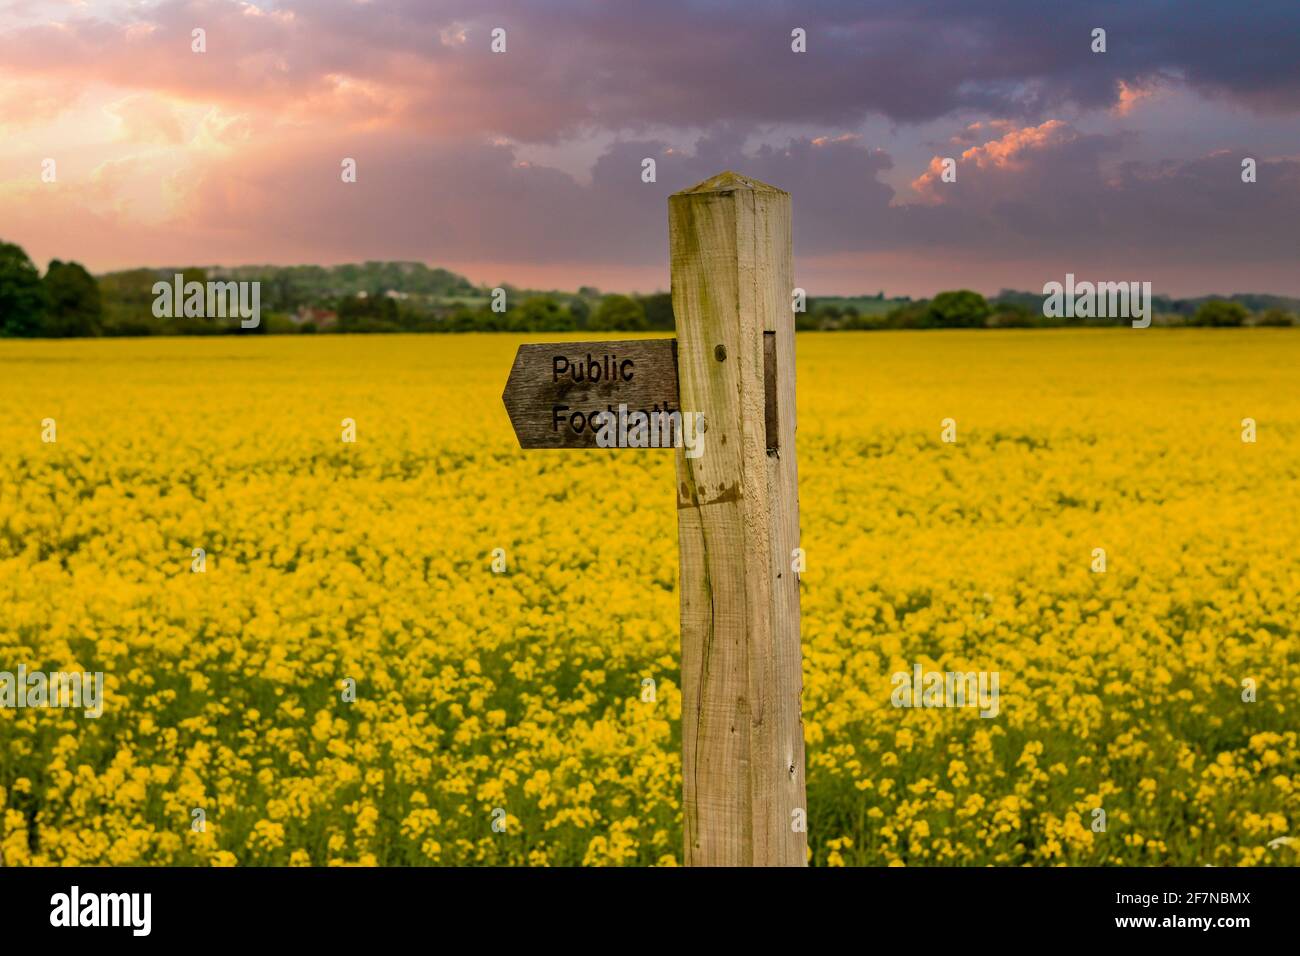 Yellow Rape Seed Crop Field and Public Footpath sign in rural England Stock Photo